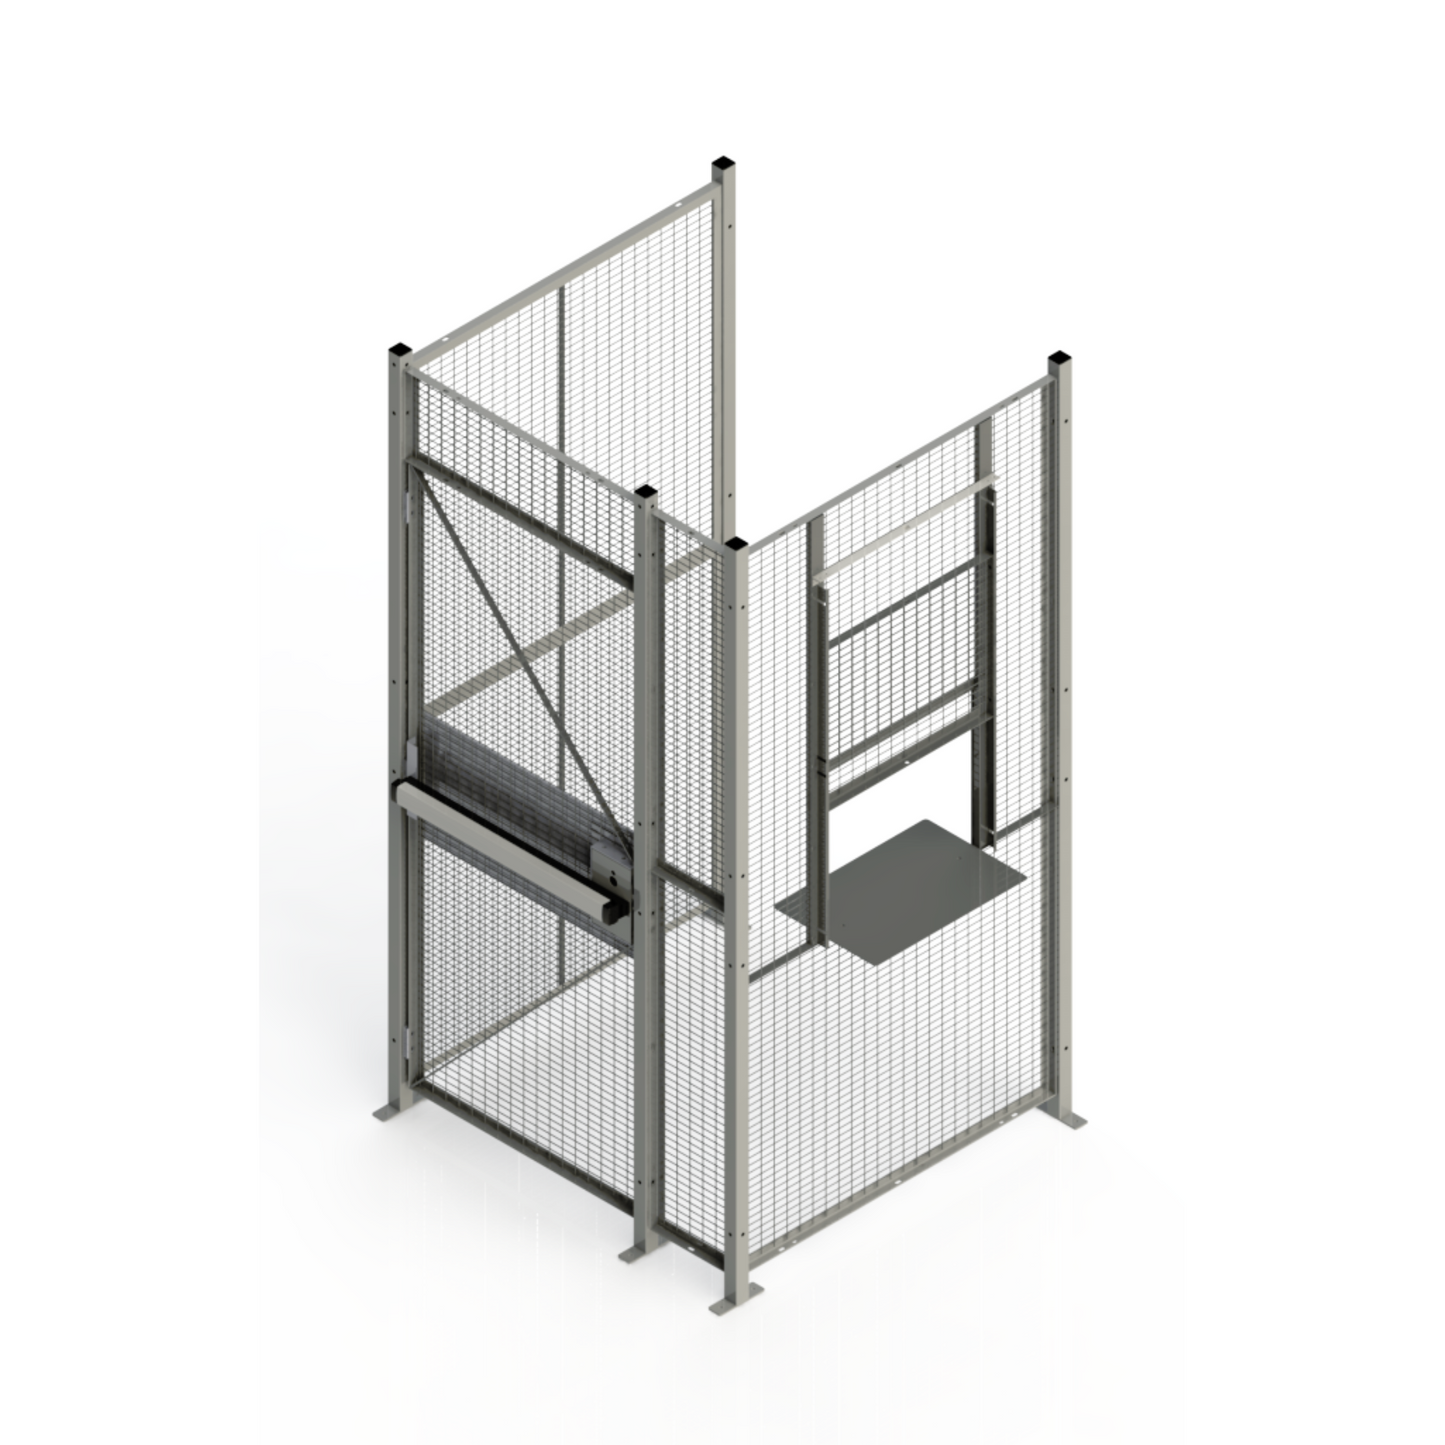 3 Sided Driver Cages (w/Push Bar & Service Window)